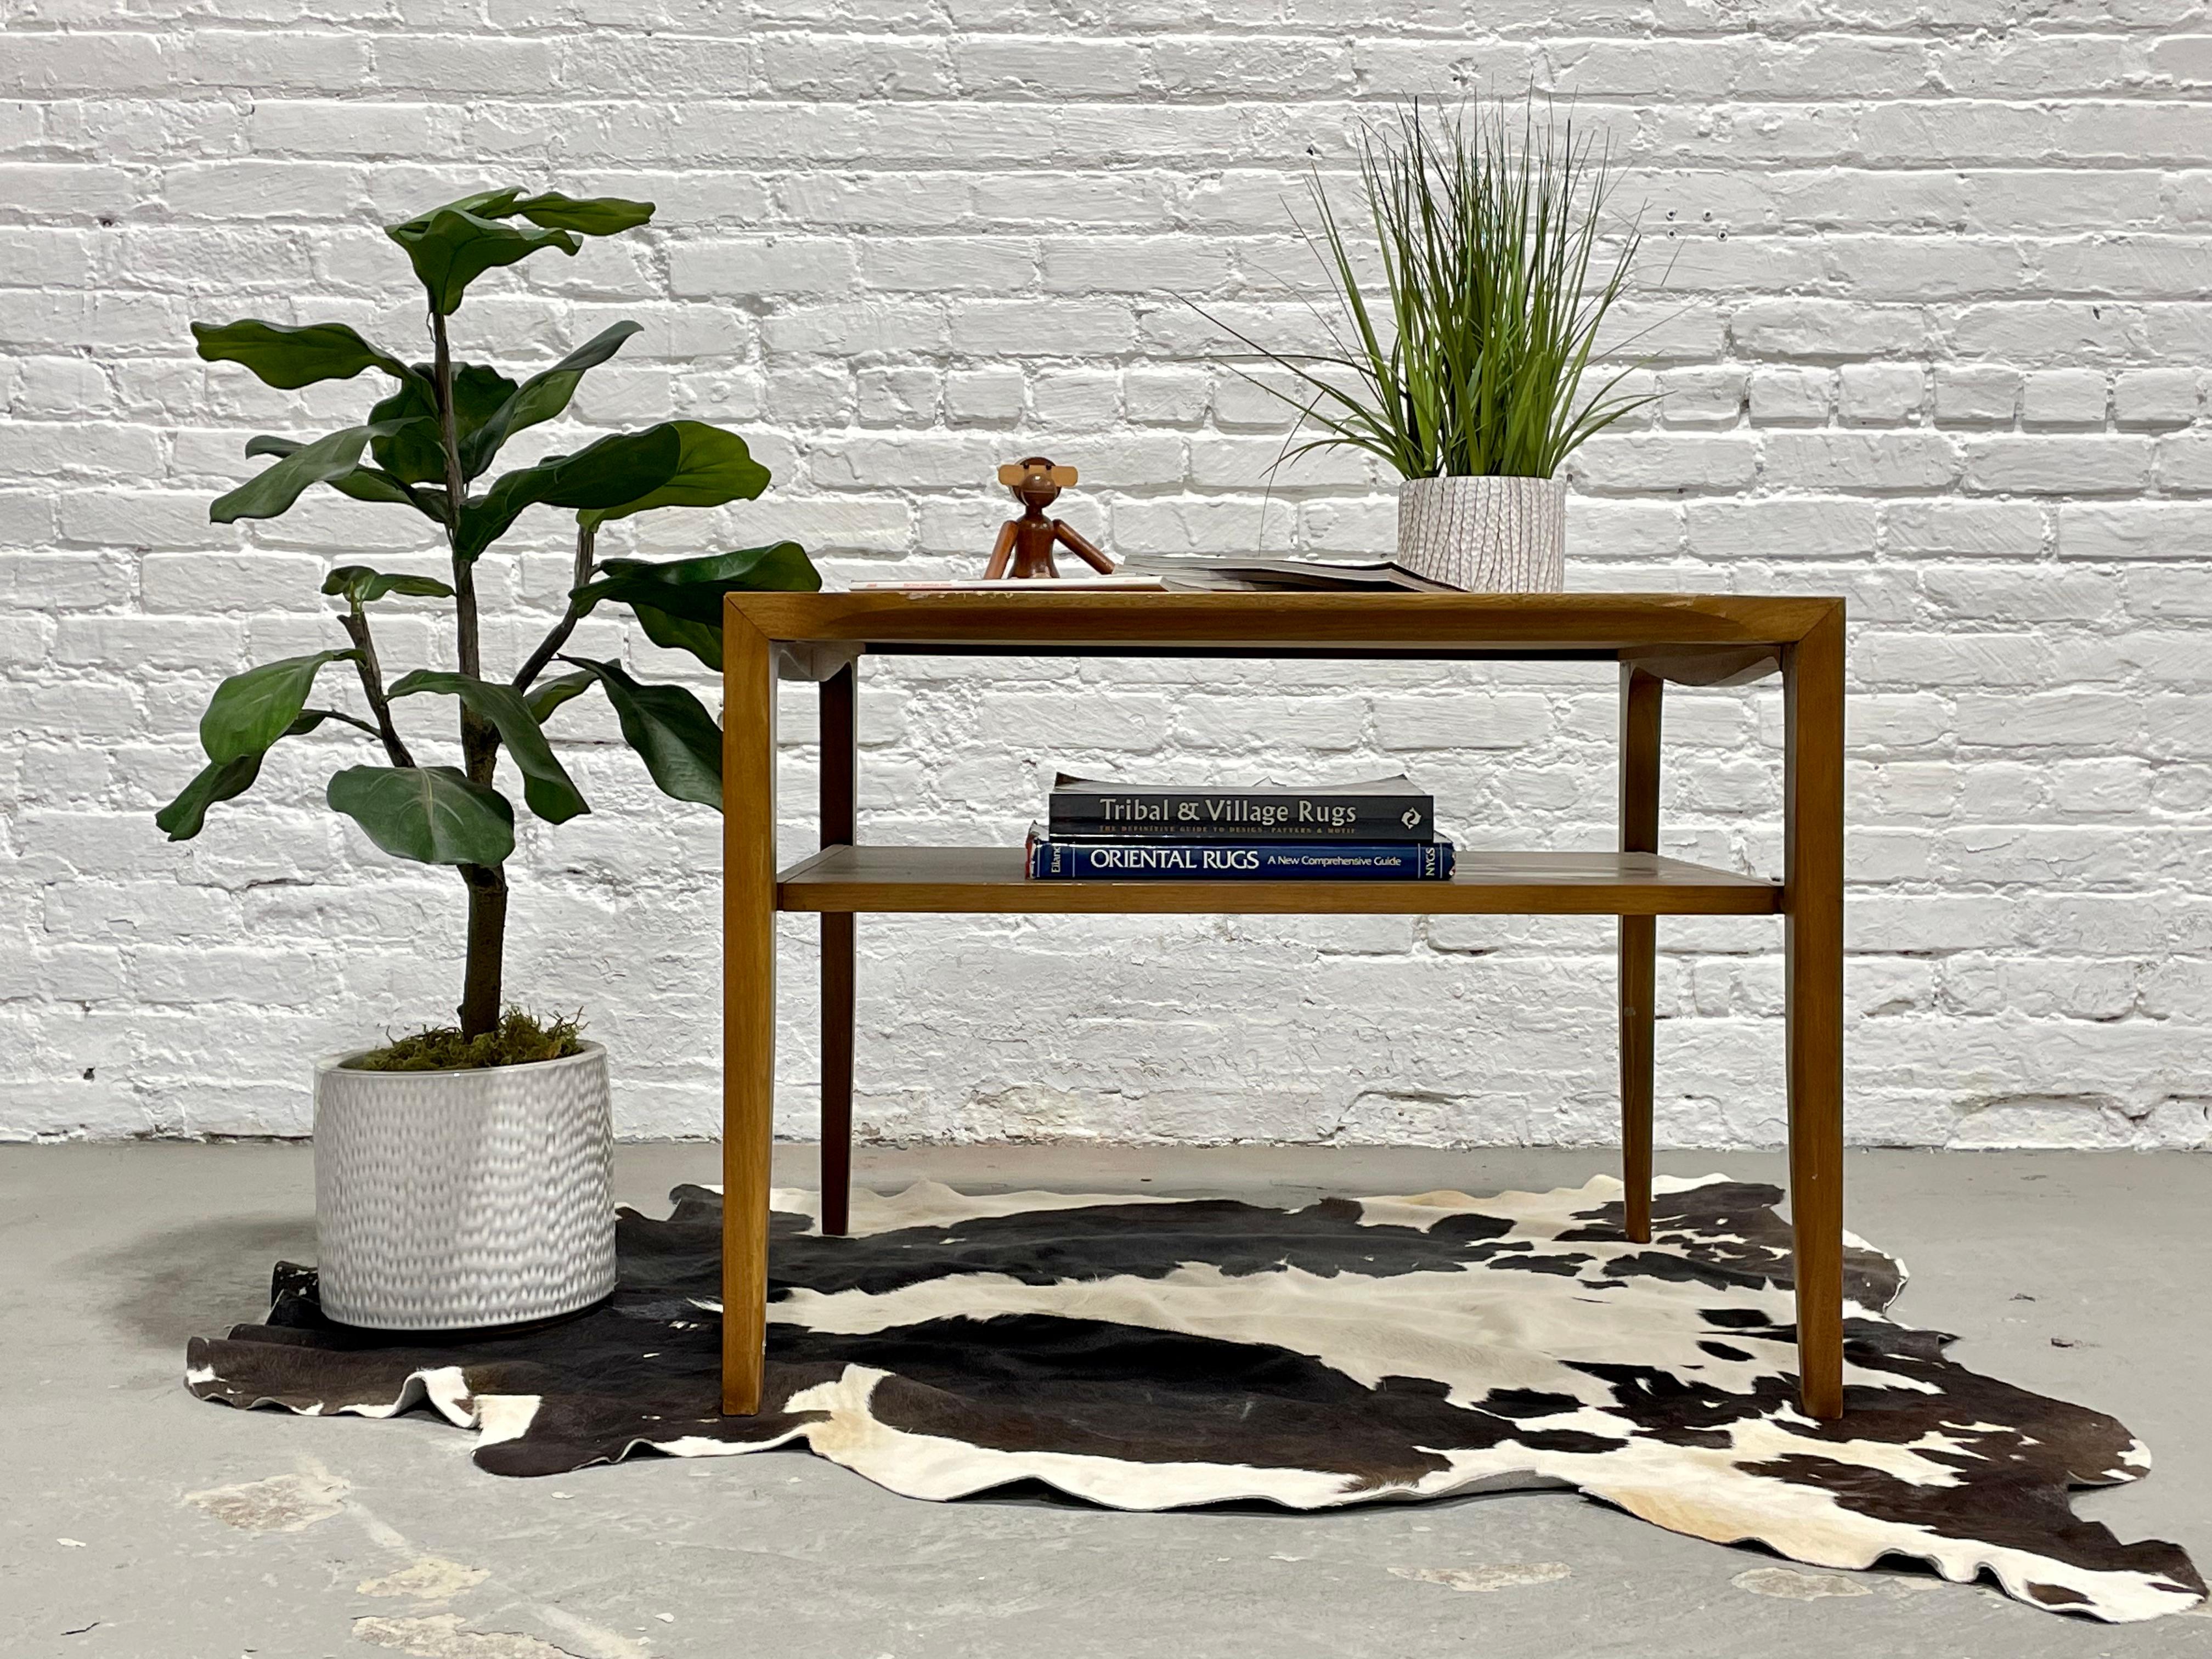 Mid-Century Modern Square End Table by John Van Koert for Drexel Profile, c. 1958. Substantial table surface space, perfect for a table lamp or displaying coffee table books. The lower area offers an additional space for displaying books or